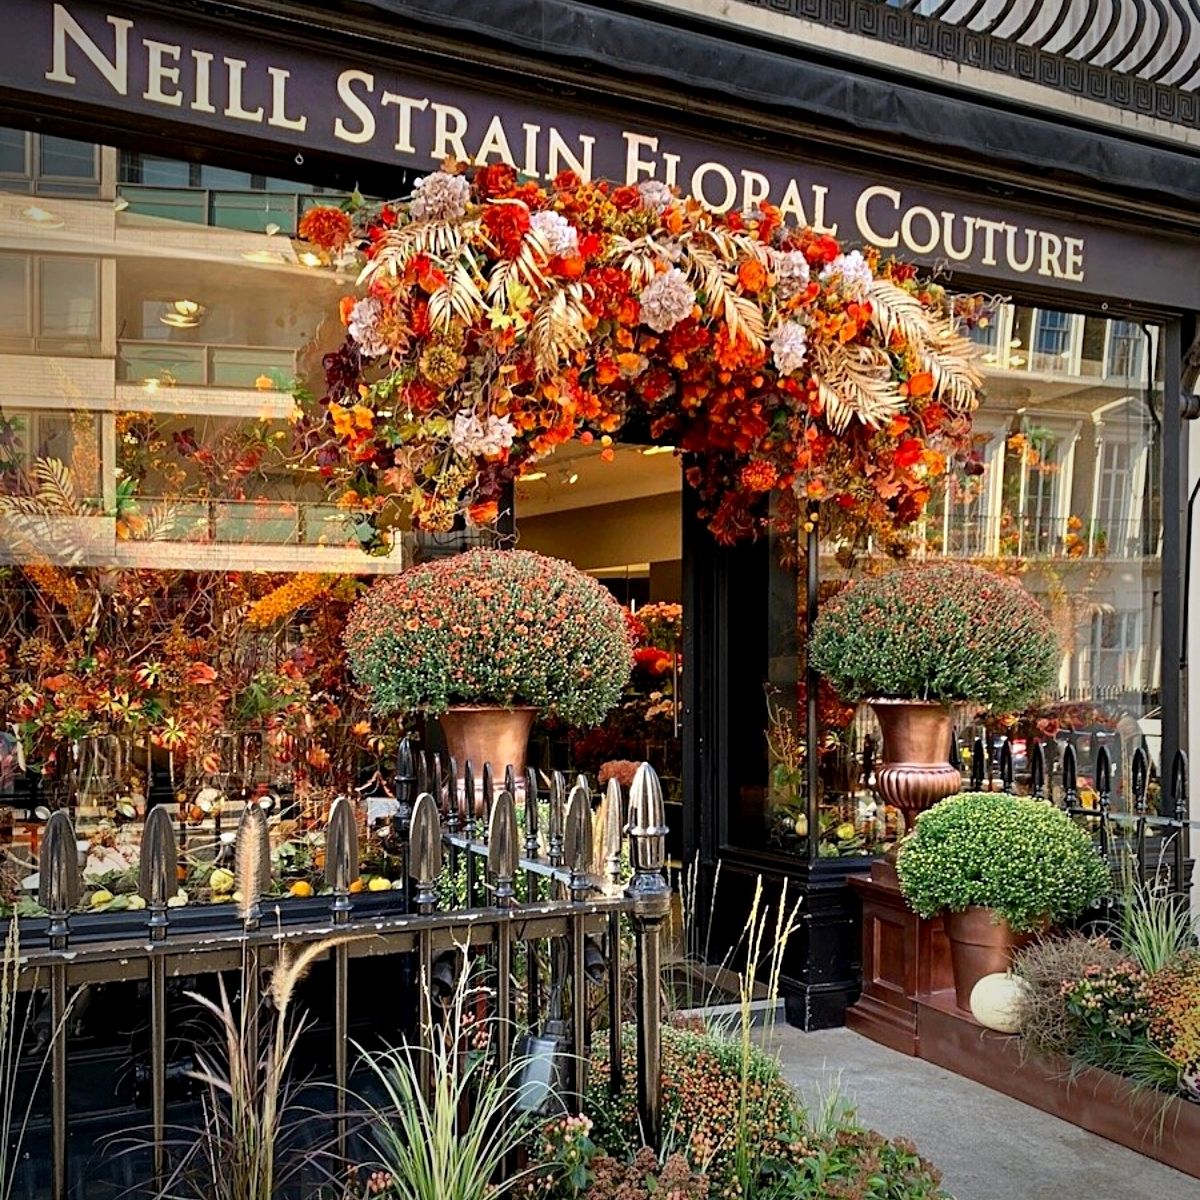 celebrating-halloween-and-thanksgiving-at-neill-strain-floral-couture-featured